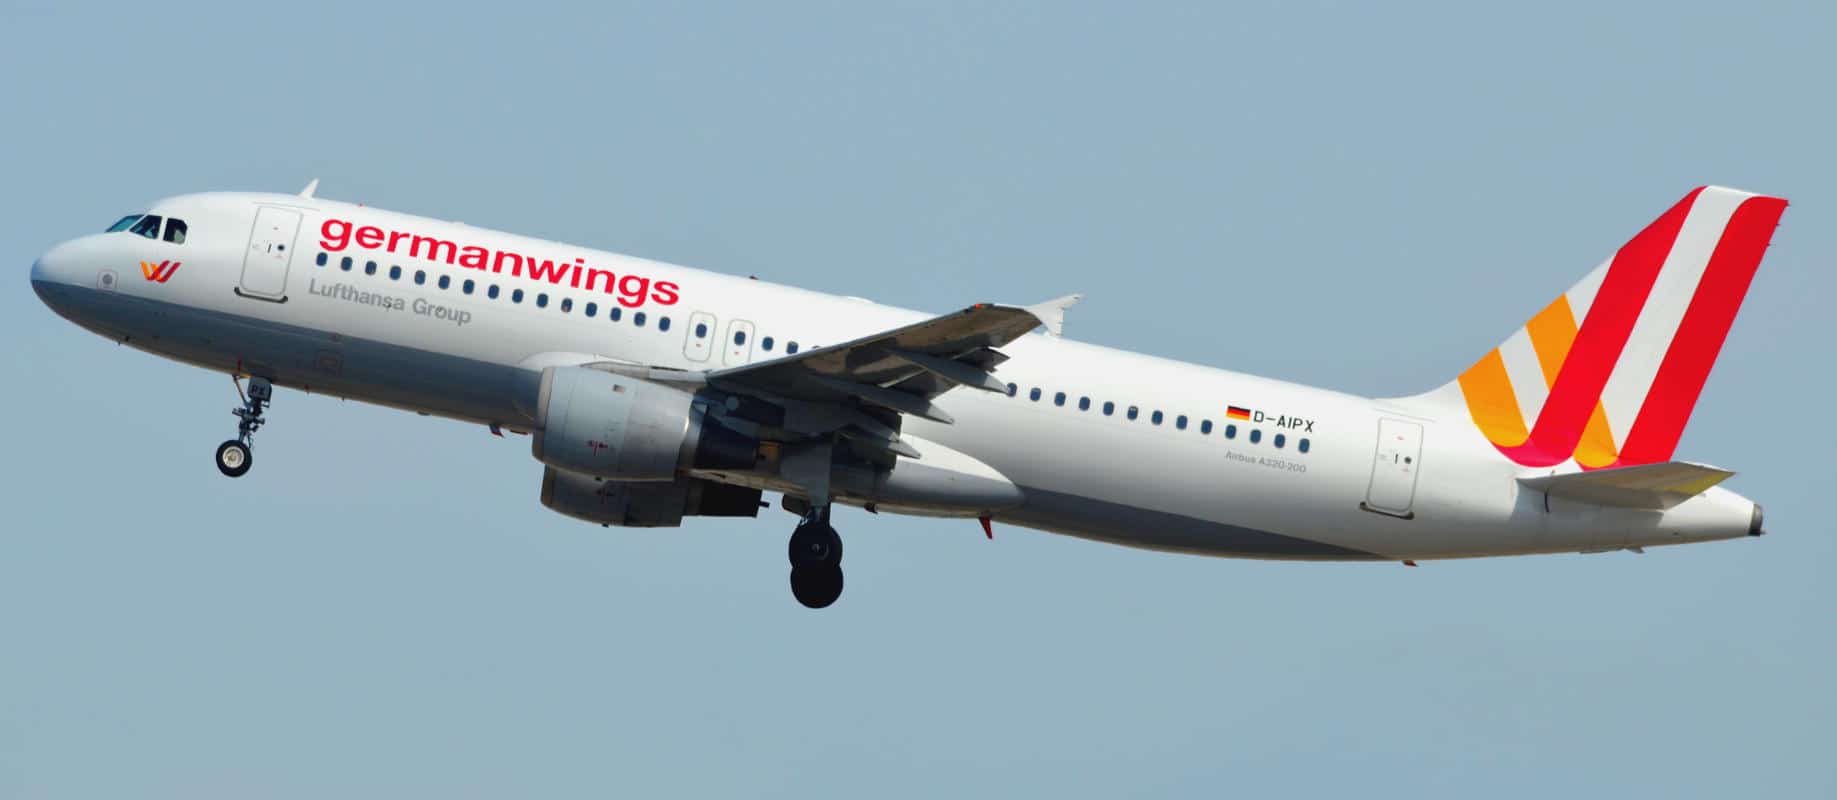 The Airbus aircraft involved in the Germanwings tragedy a year earlier